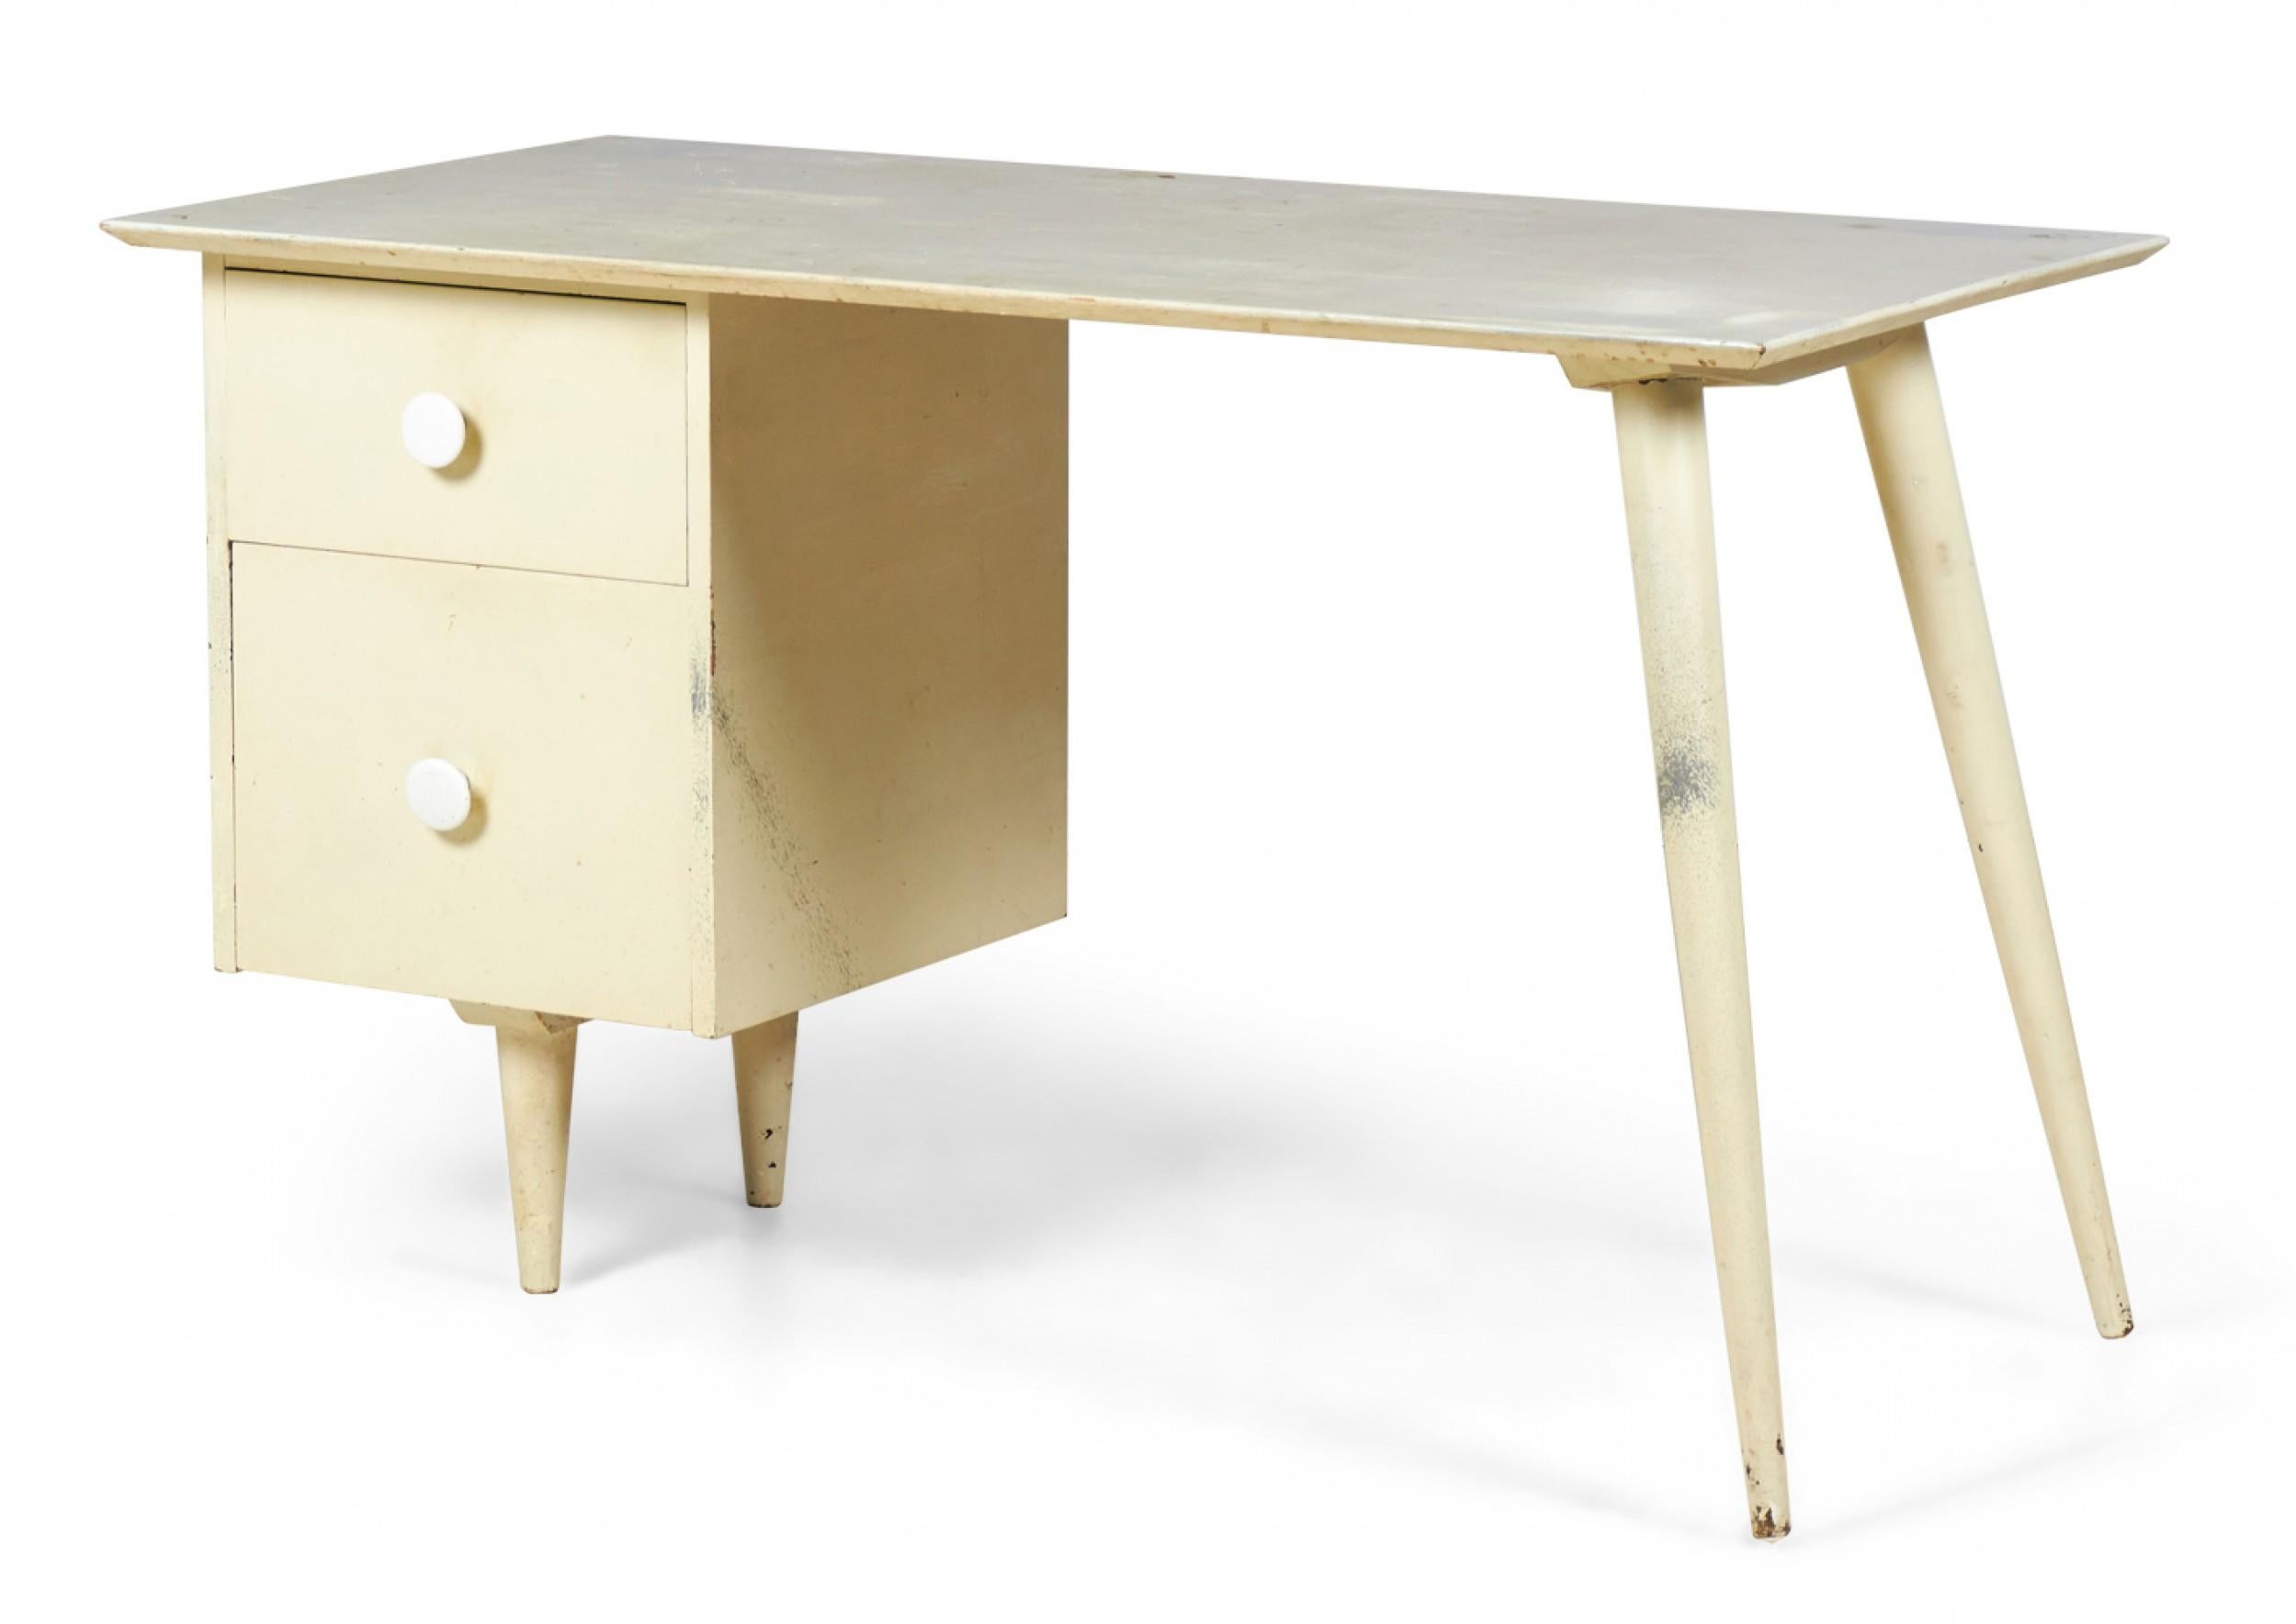 American mid-century wooden white-painted student desk with a rectangular desktop supported on the left by two drawers with circular knob pulls resting on two short tapered legs, and on the right by two angled tapered legs. (PAUL MCCOBB, model 1560)